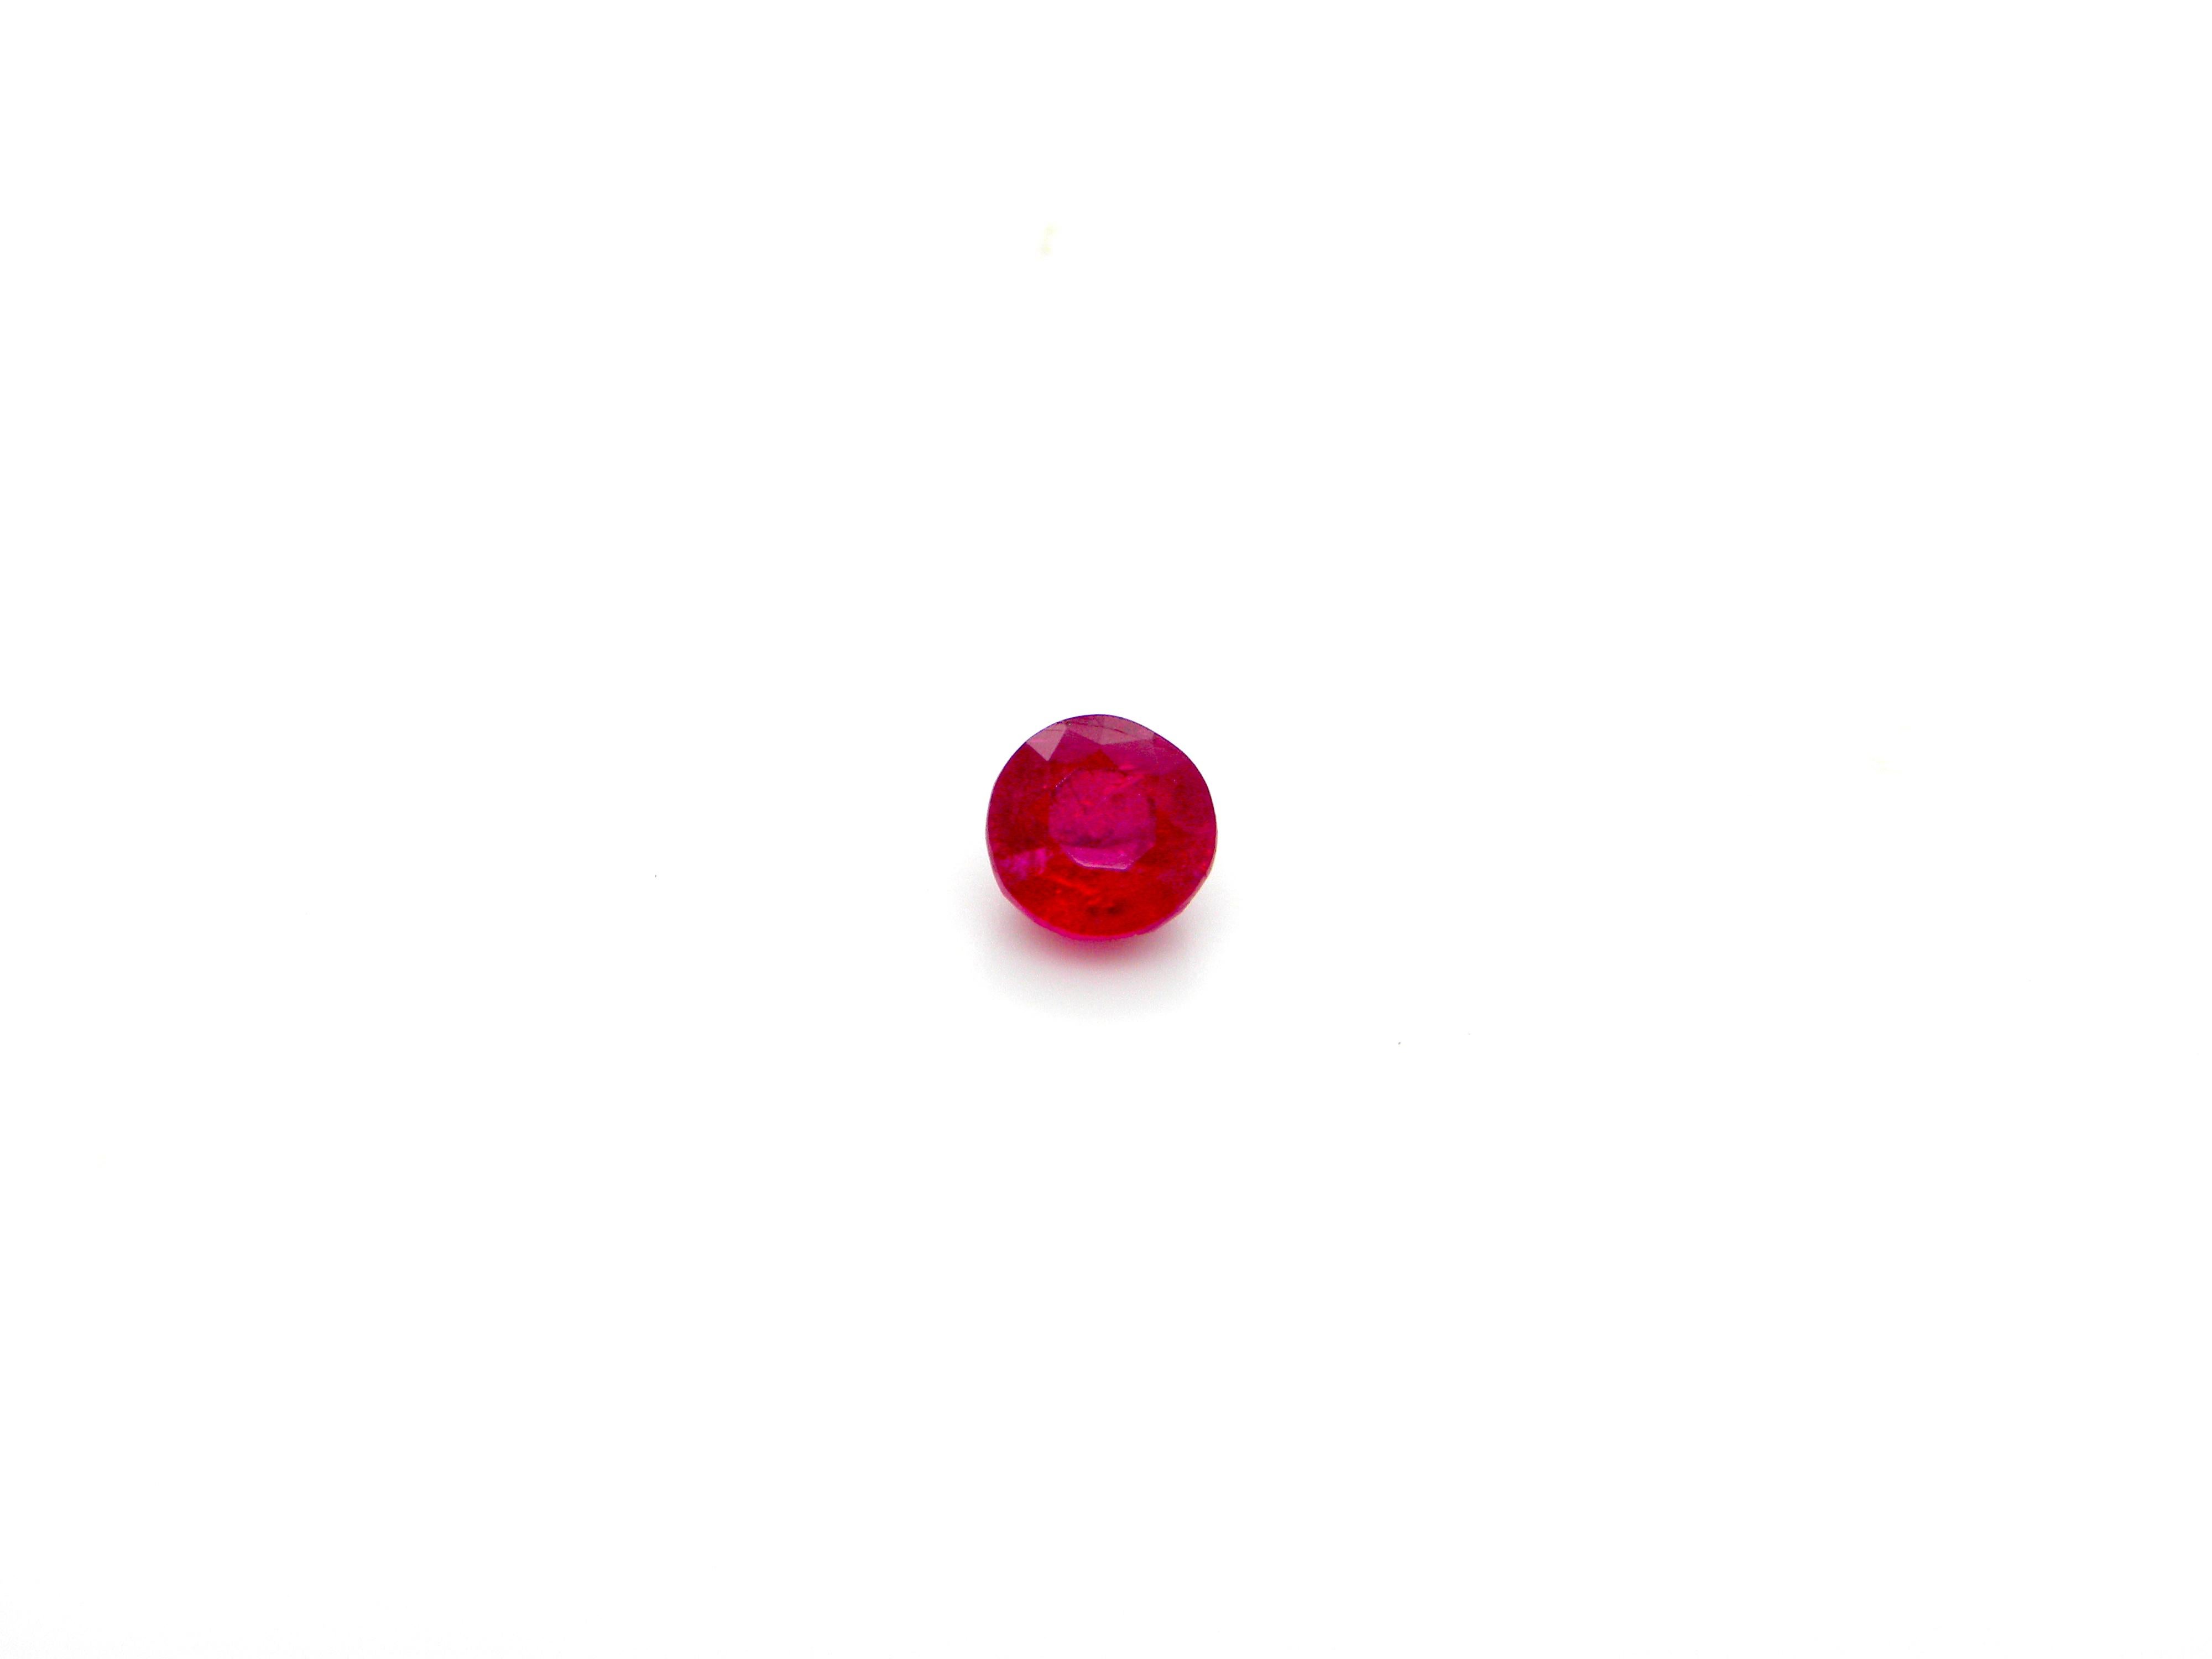 Round Cut 1.12 Carat GIA Certified Pigeon's Blood Red Unheated Round-Cut Burmese Ruby